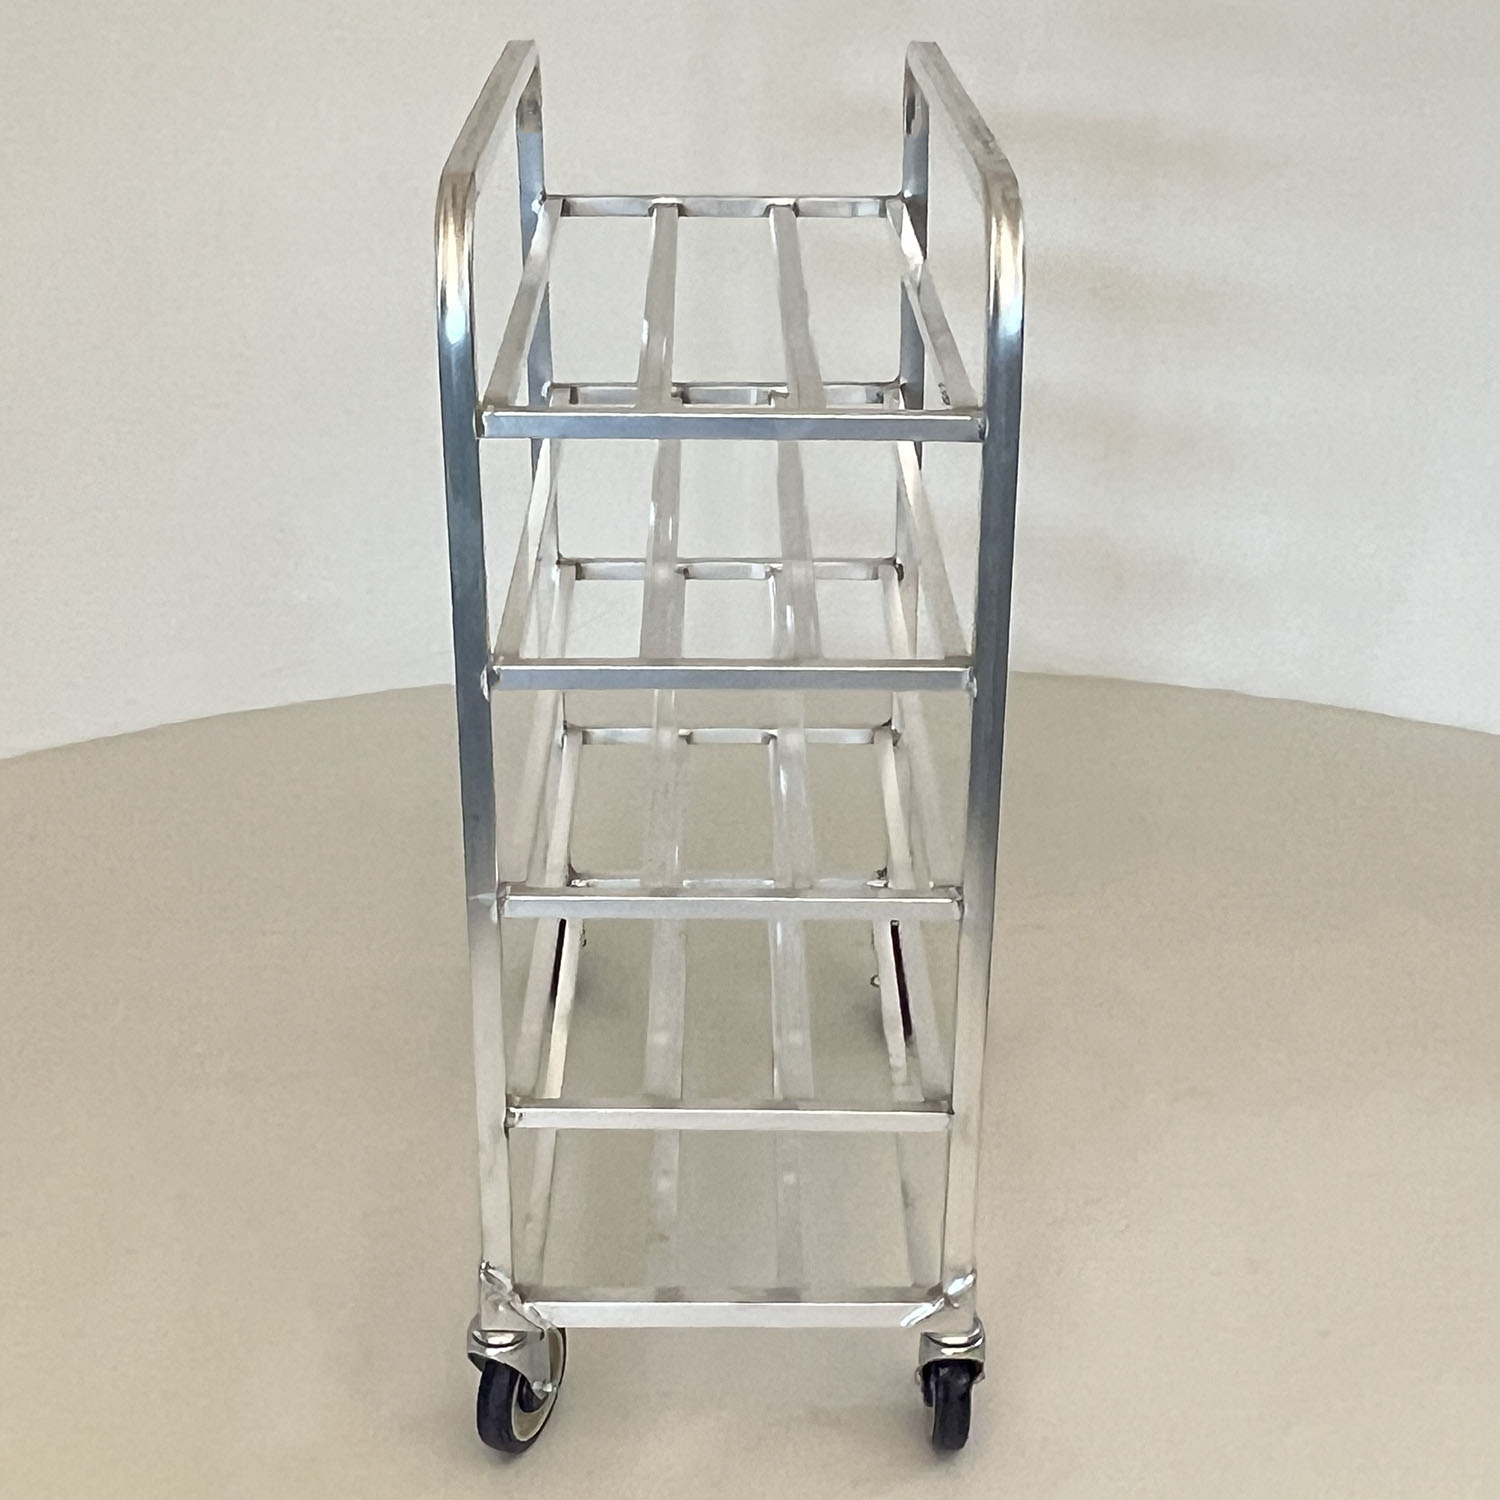 NSF approved. This food service cart meets strict standards and procedures imposed by NSF.